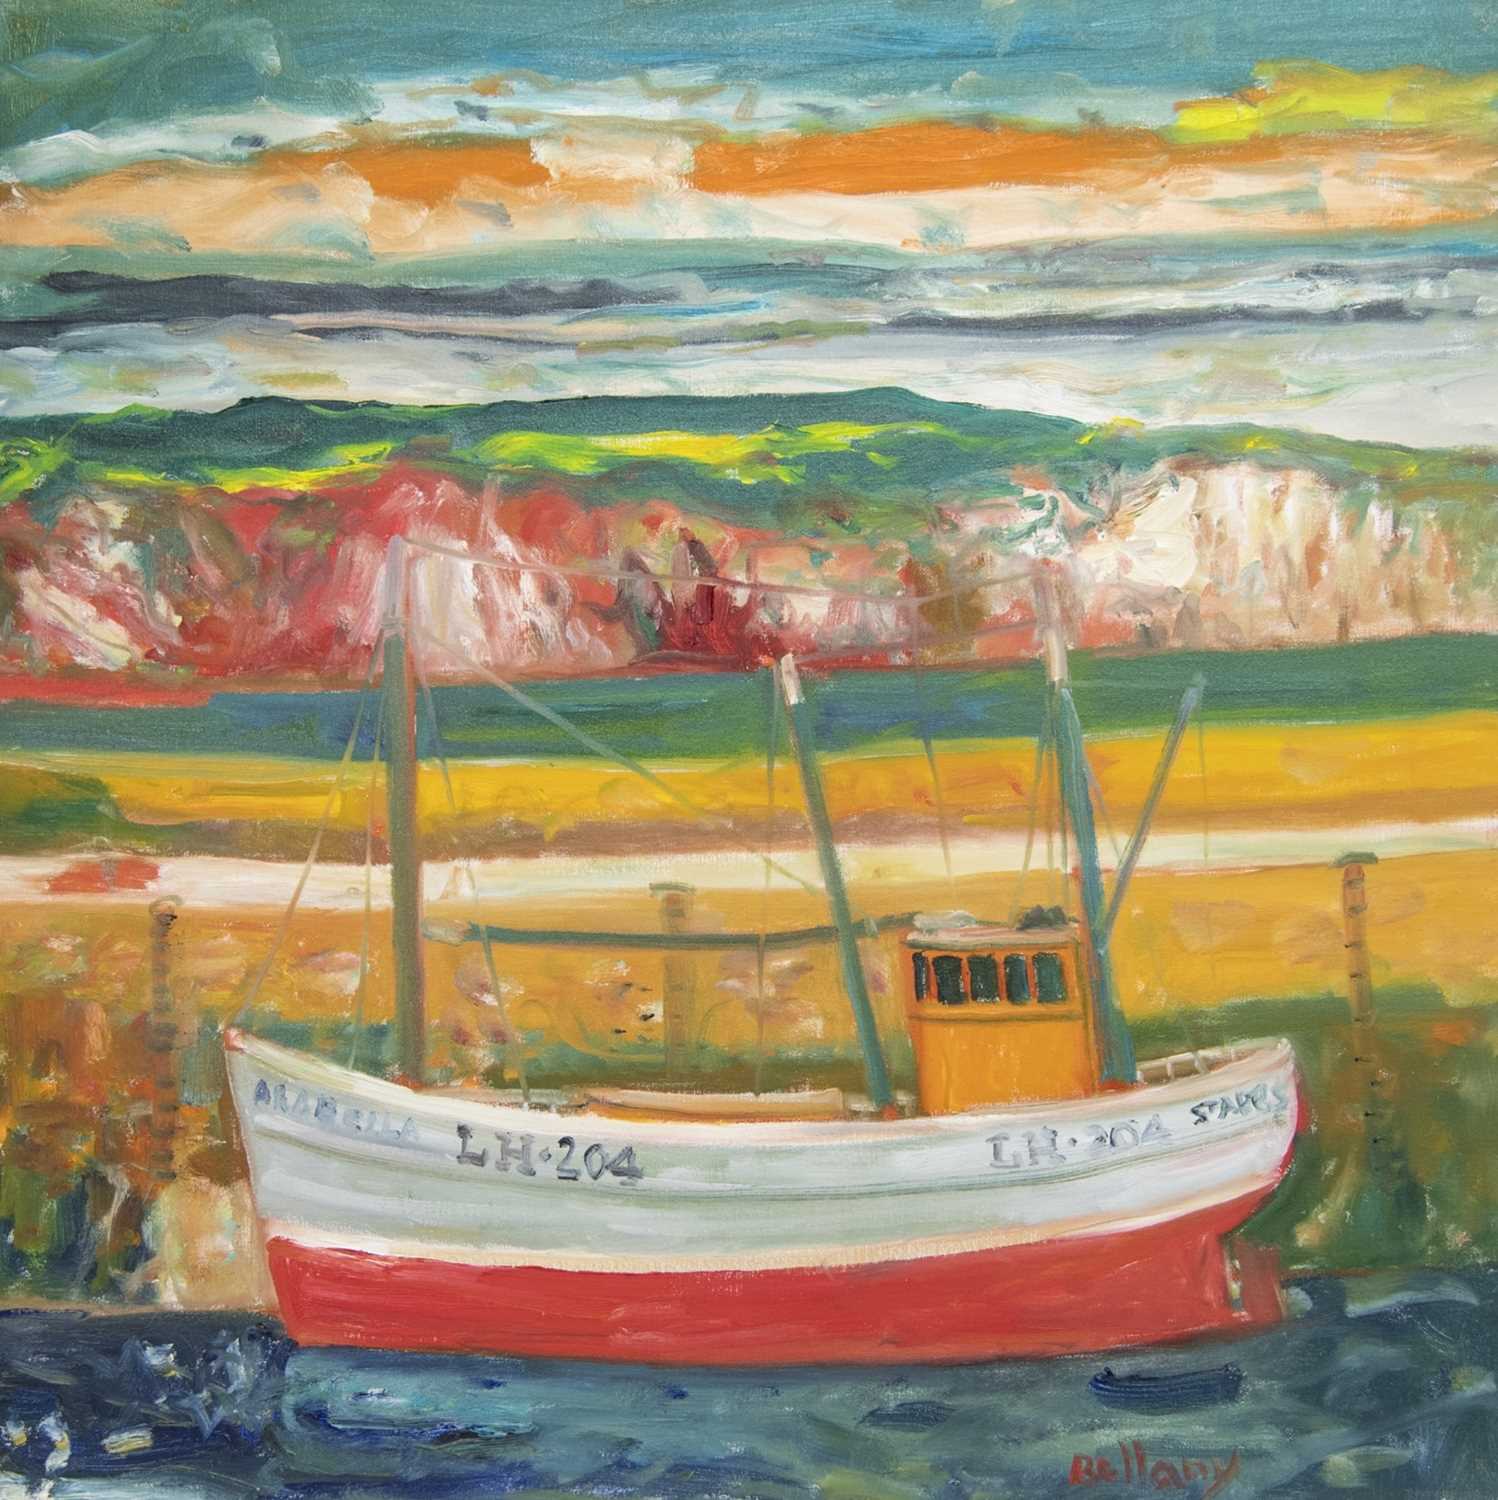 Lot 564 - LH204 AT ST ABBS ,AN OIL BY JOHN BELLANY